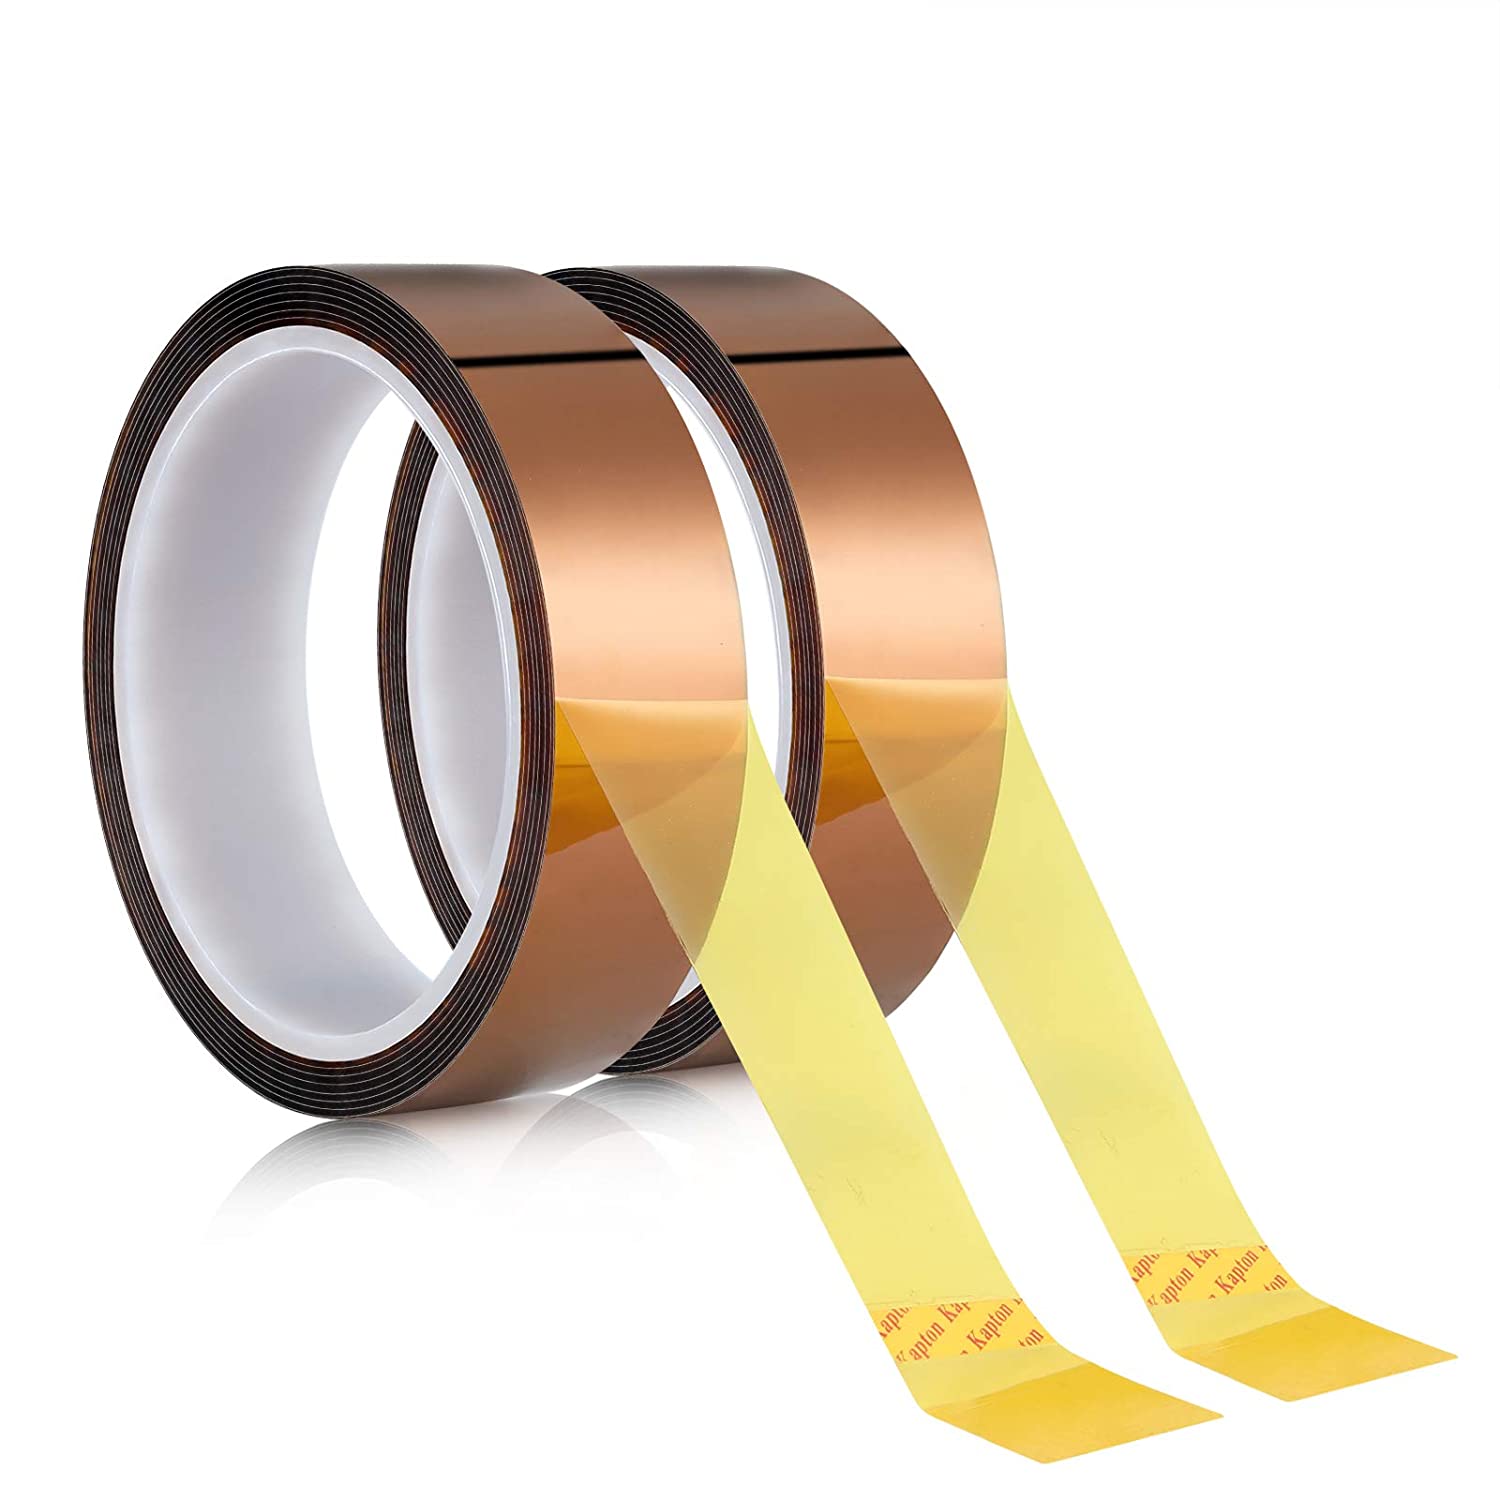 Mobestech 4 Rolls Tape Board Masking Tape Sublimation Tape for Electronics  Welding Silicone Subsensitive Adhesive The Iron Hot Pressing